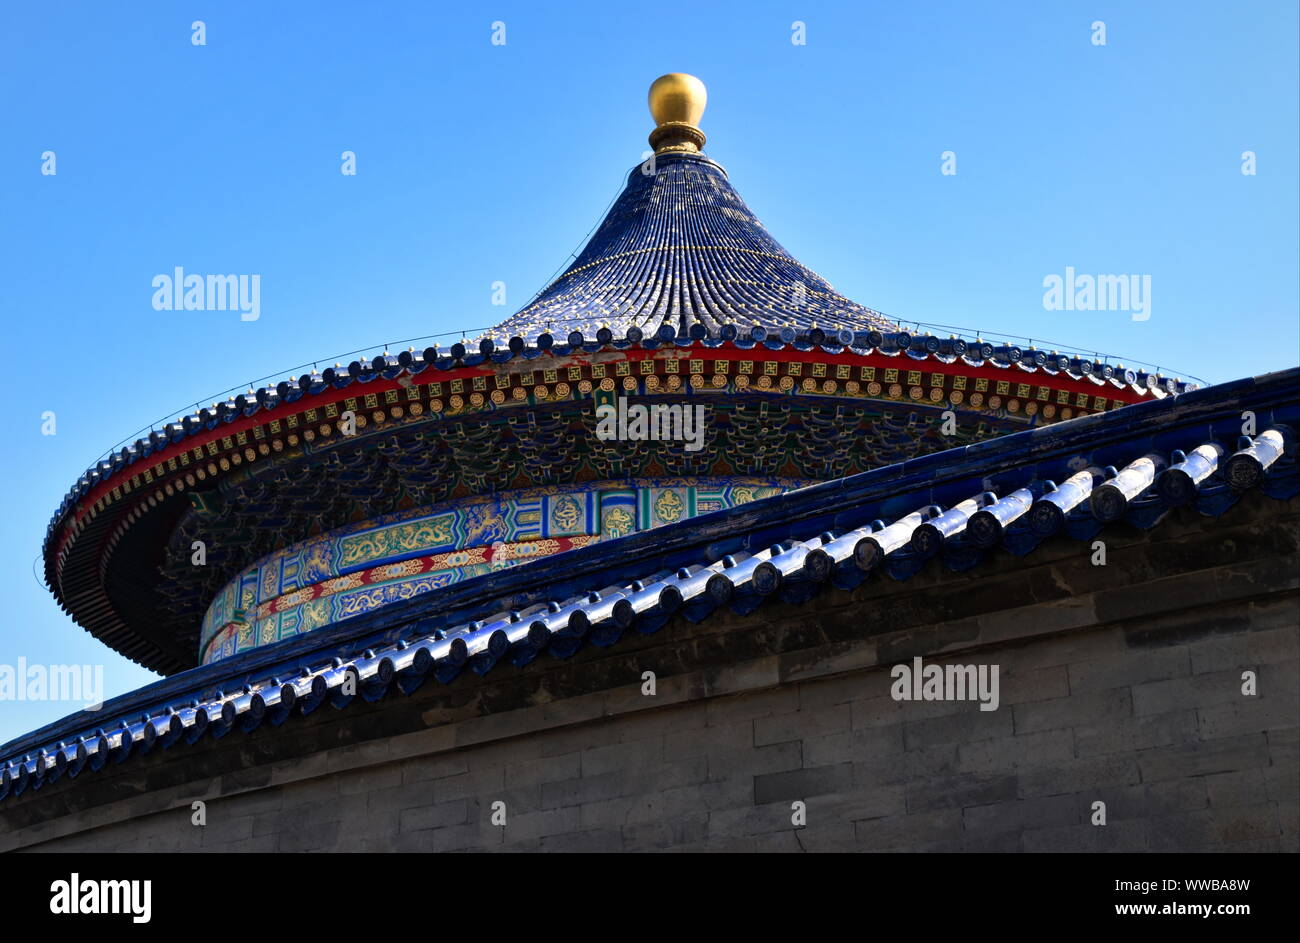 Traditional Chinese architecture on Imperial Vault of Heaven of the Temple of Heaven complex, Beijing, China Stock Photo